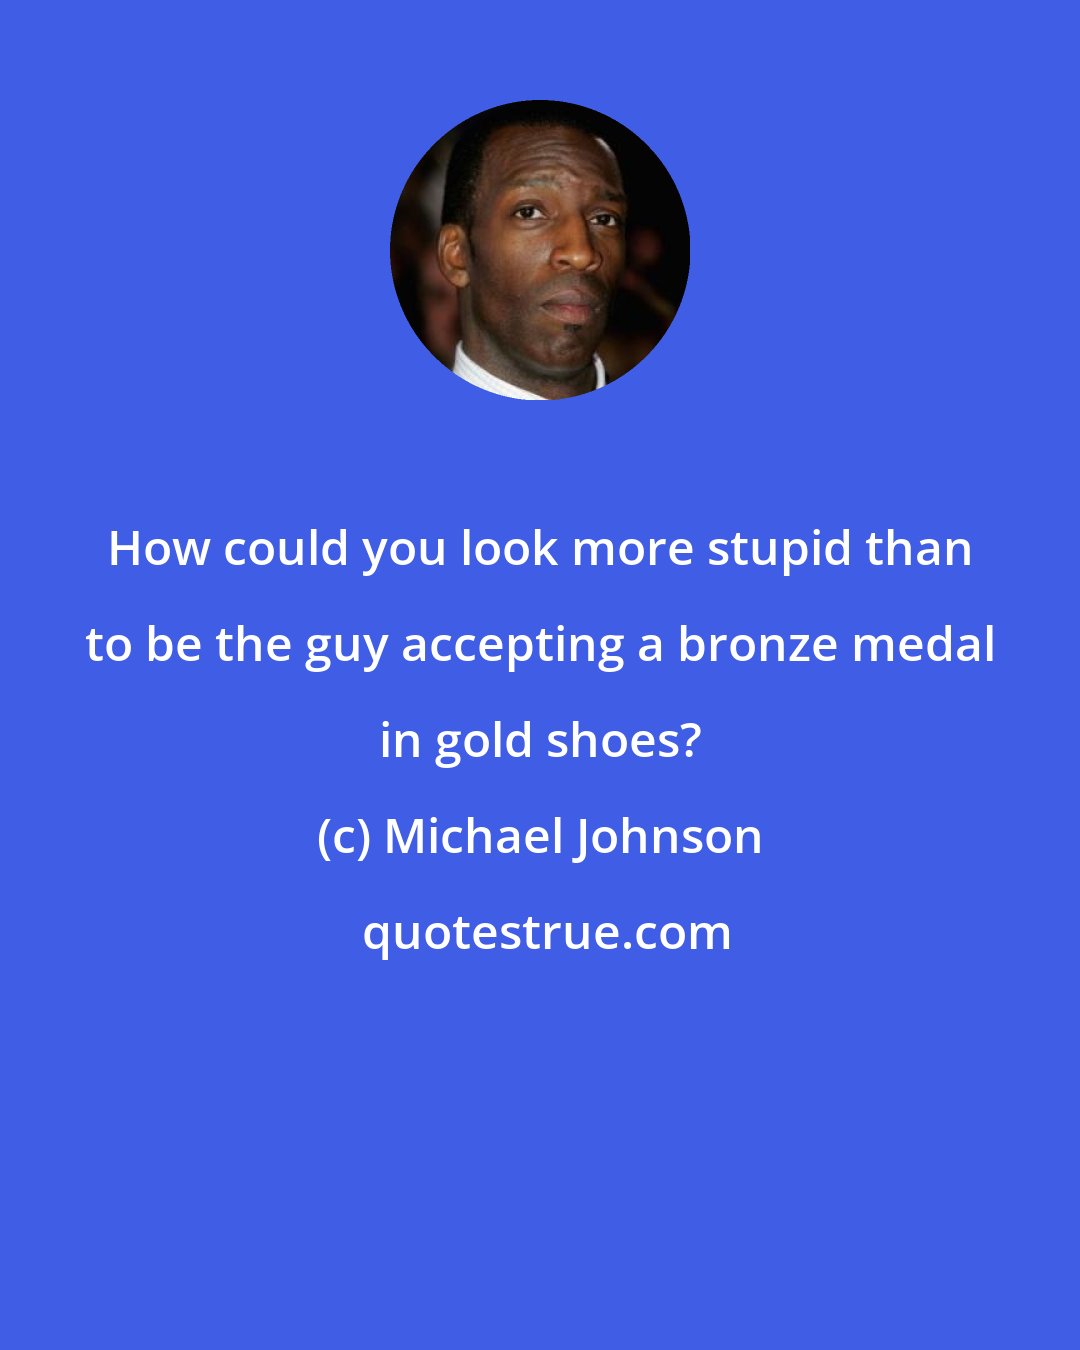 Michael Johnson: How could you look more stupid than to be the guy accepting a bronze medal in gold shoes?